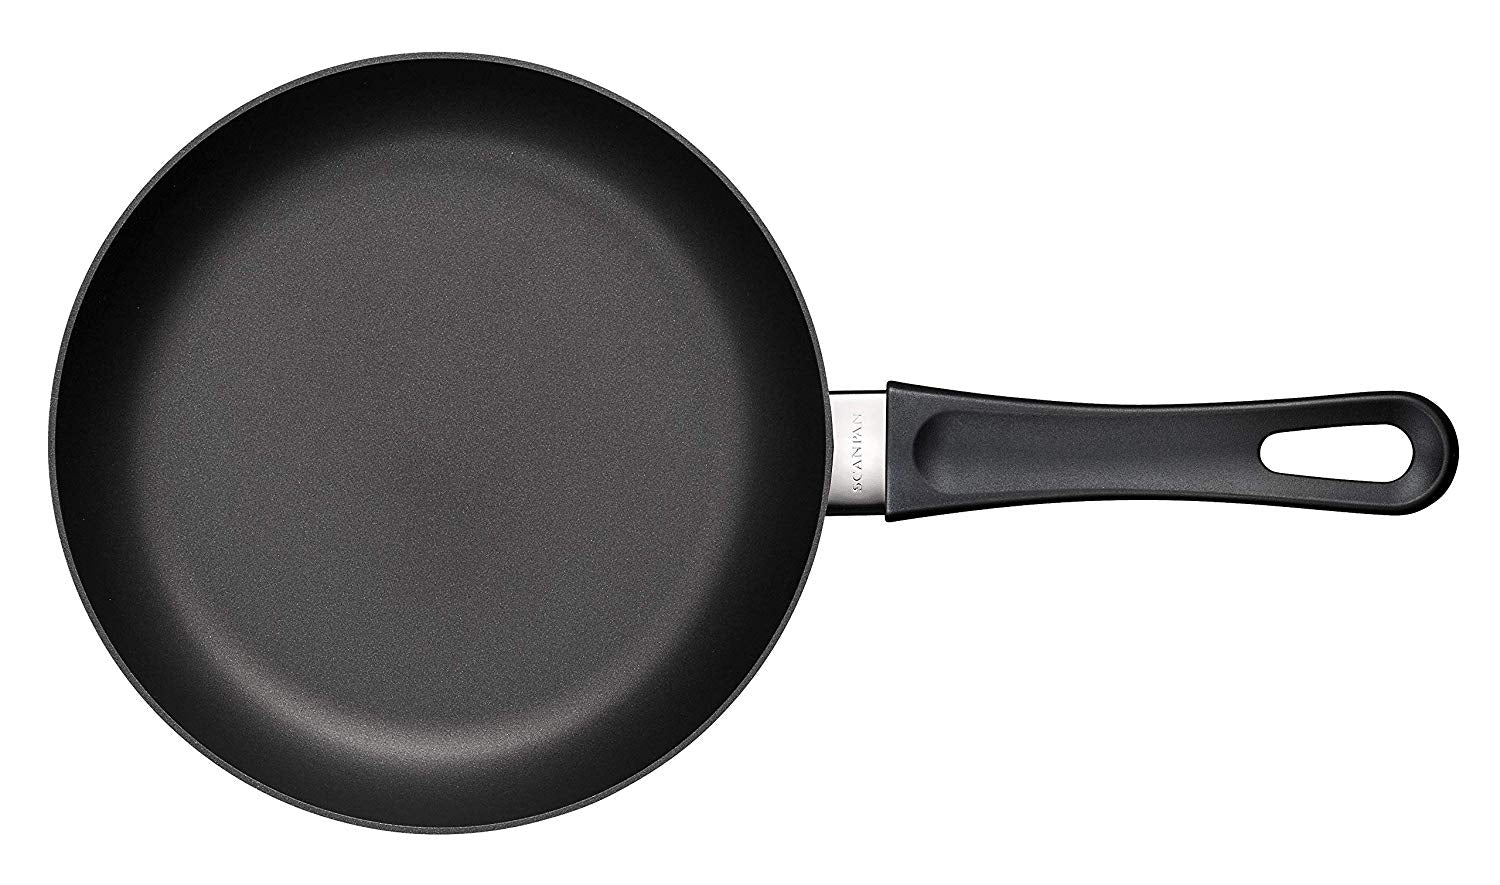 Scanpan Classic 8 Nonstick Fry Pan 20001204 - The Luxury Home Store